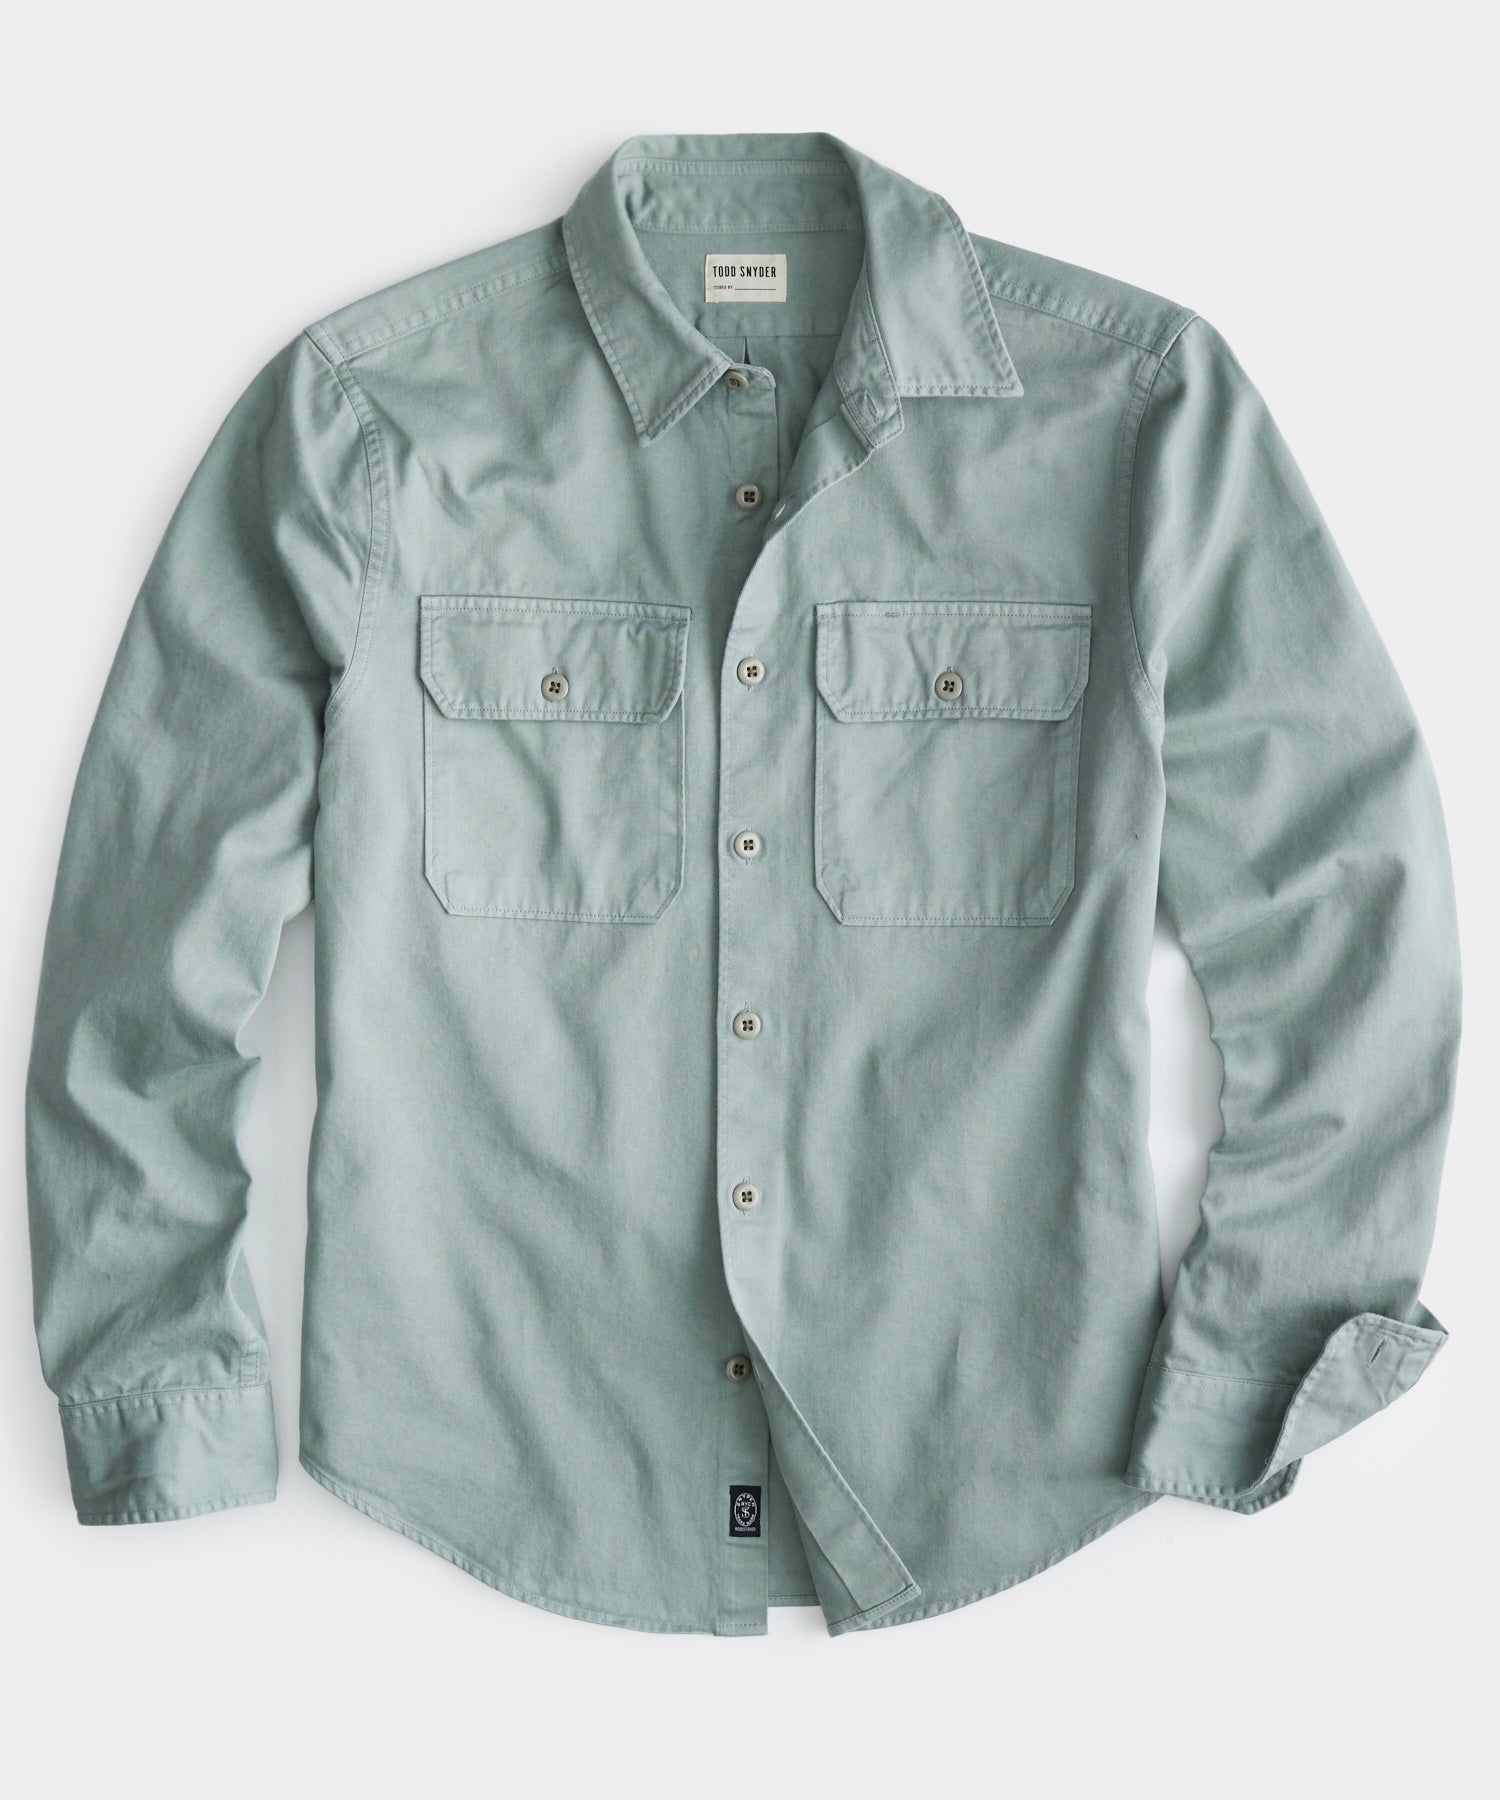 Two Pocket Utility Long Sleeve Shirt In Soft Sage